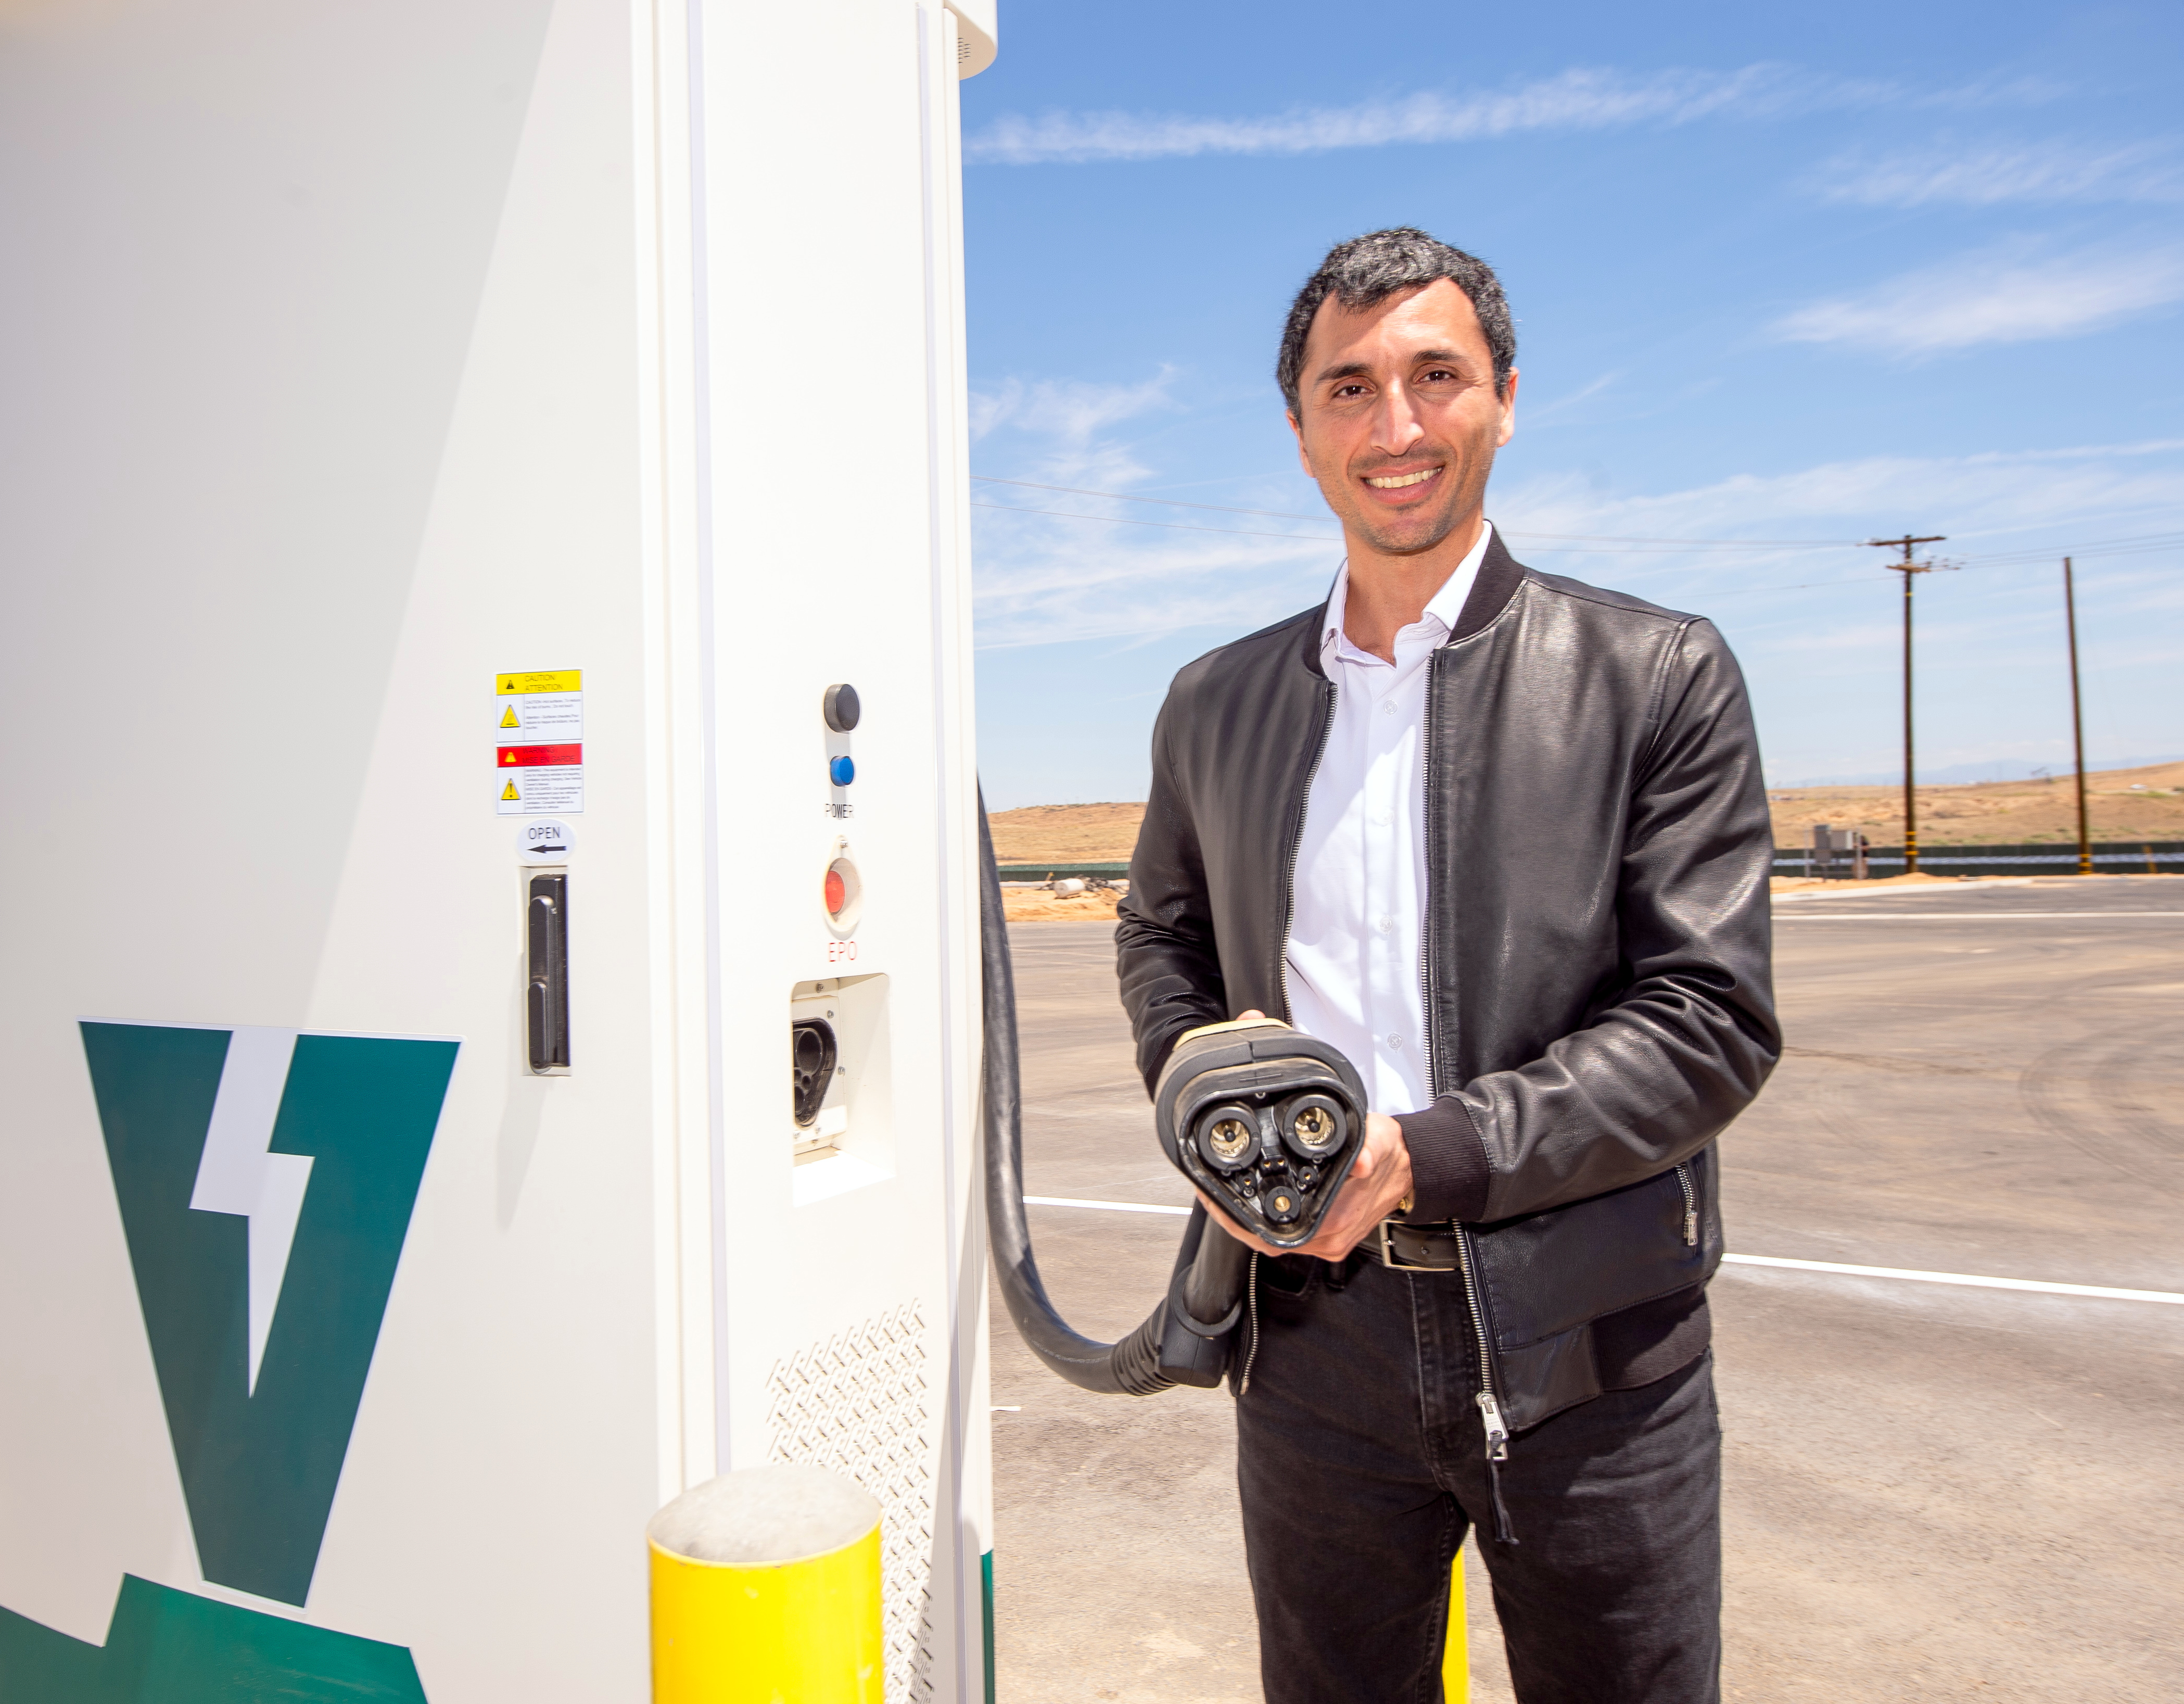 Salim Youssefzadeh is pictured at one of WattEV's newest charging stations in Bakersfield, CA